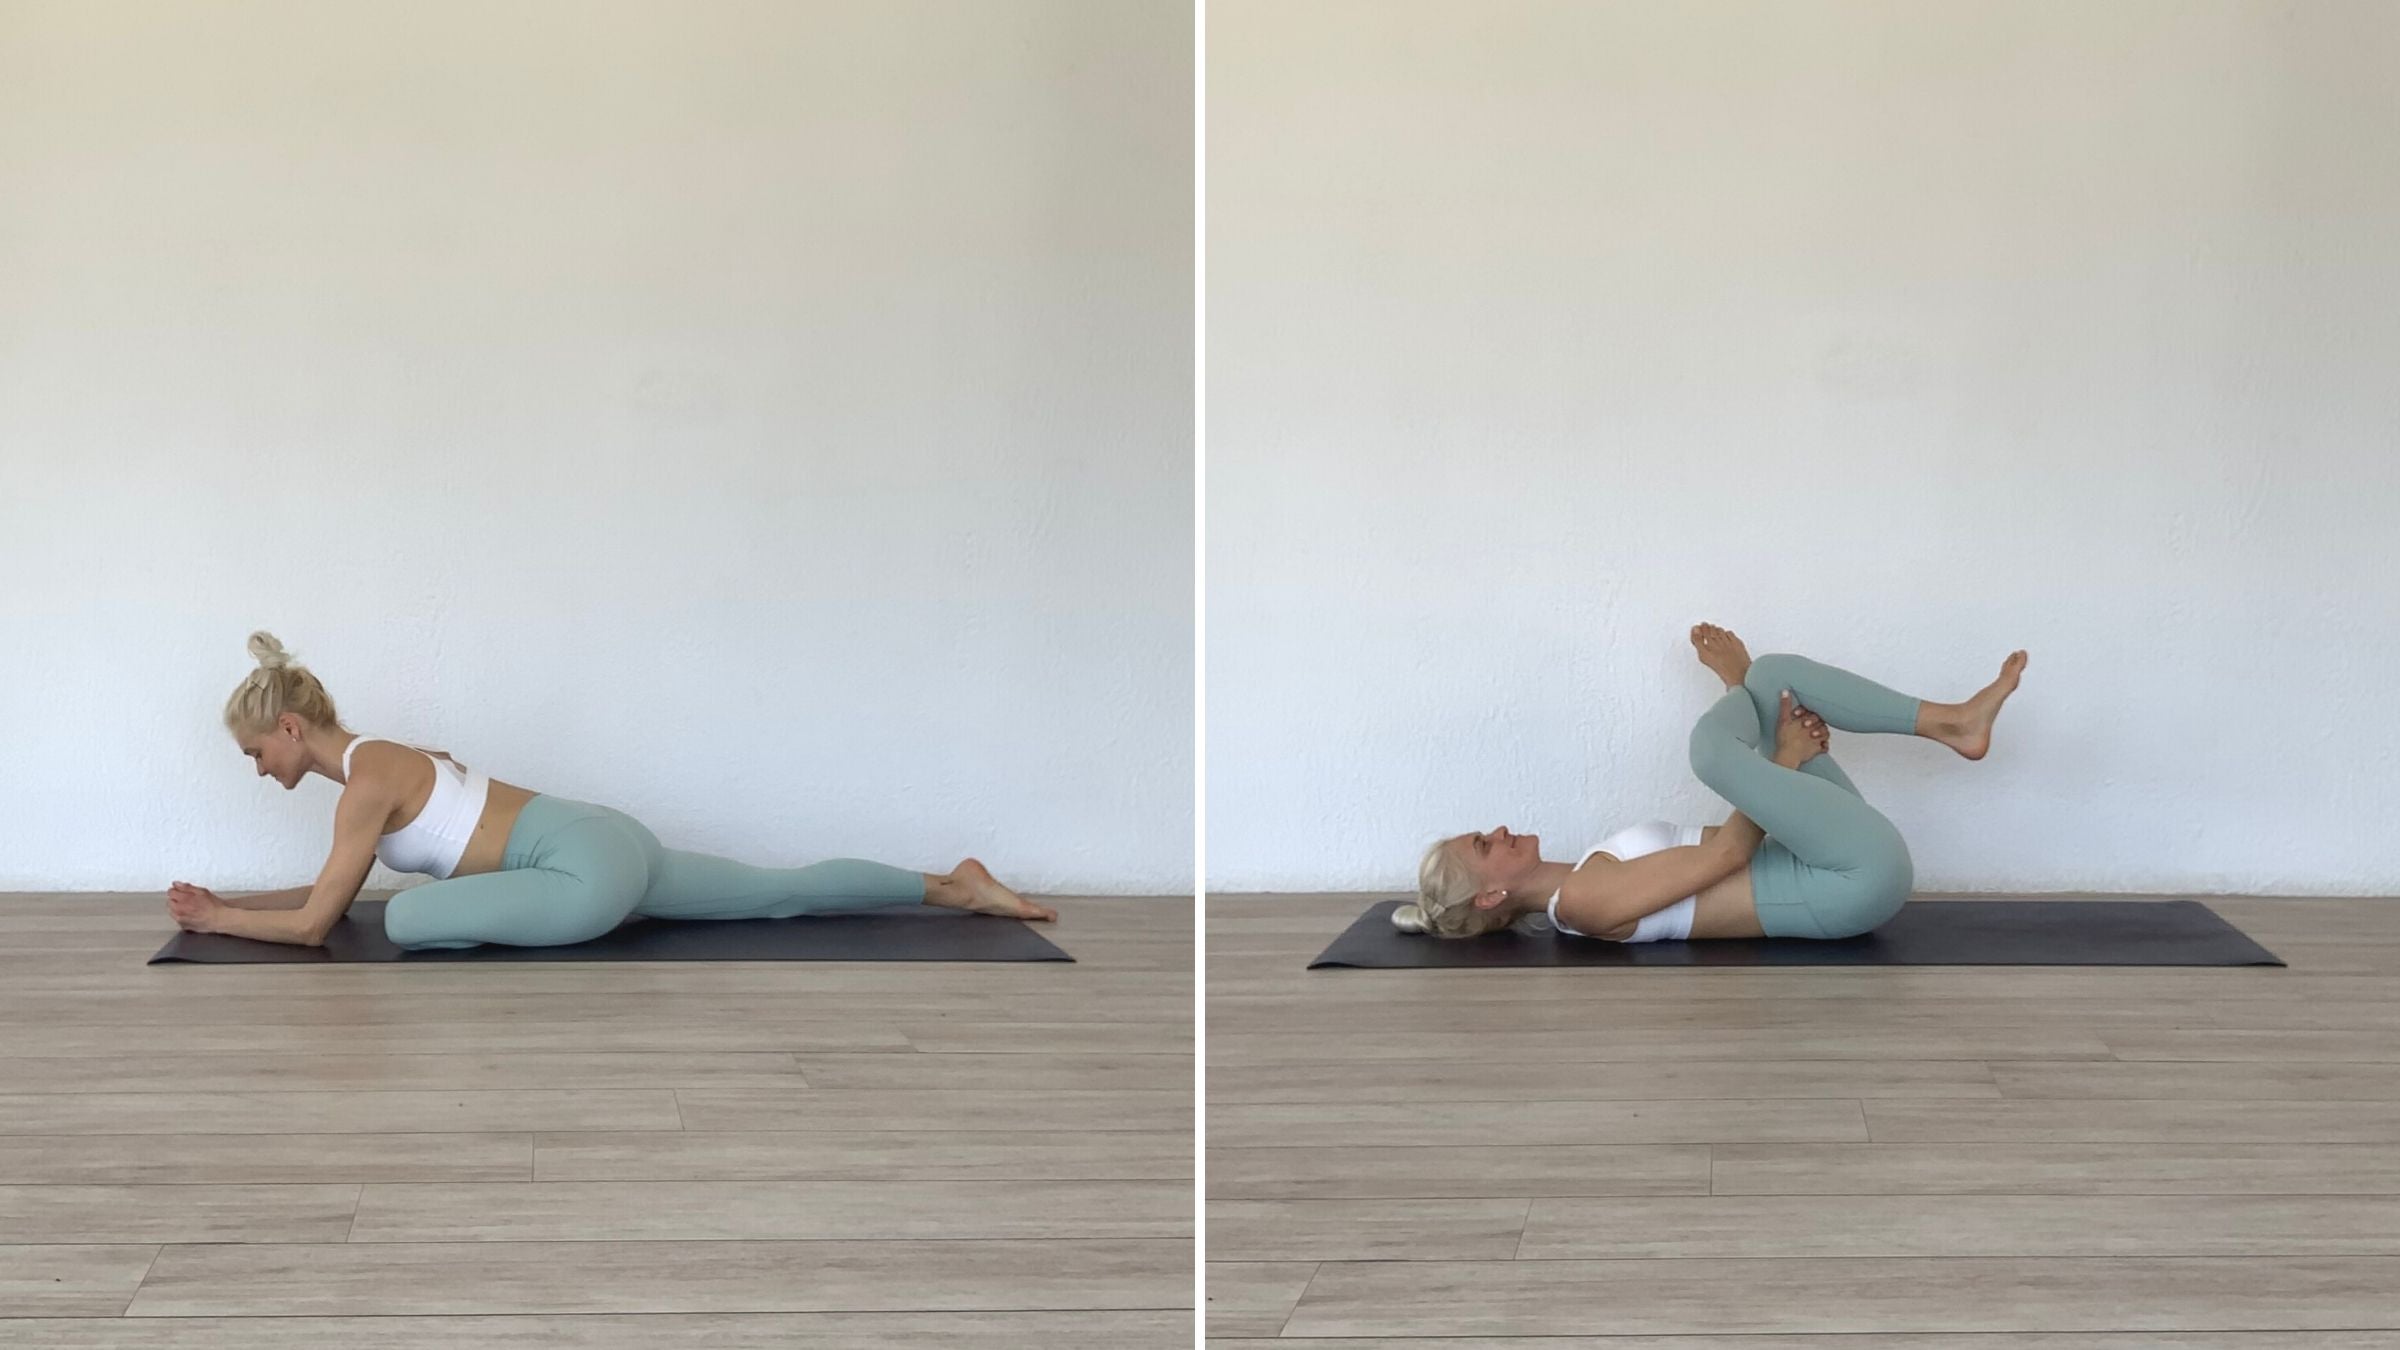 Reclining Postures  Steps  Benefits  Learn Yogasanas Online  Yoga and  Kerala